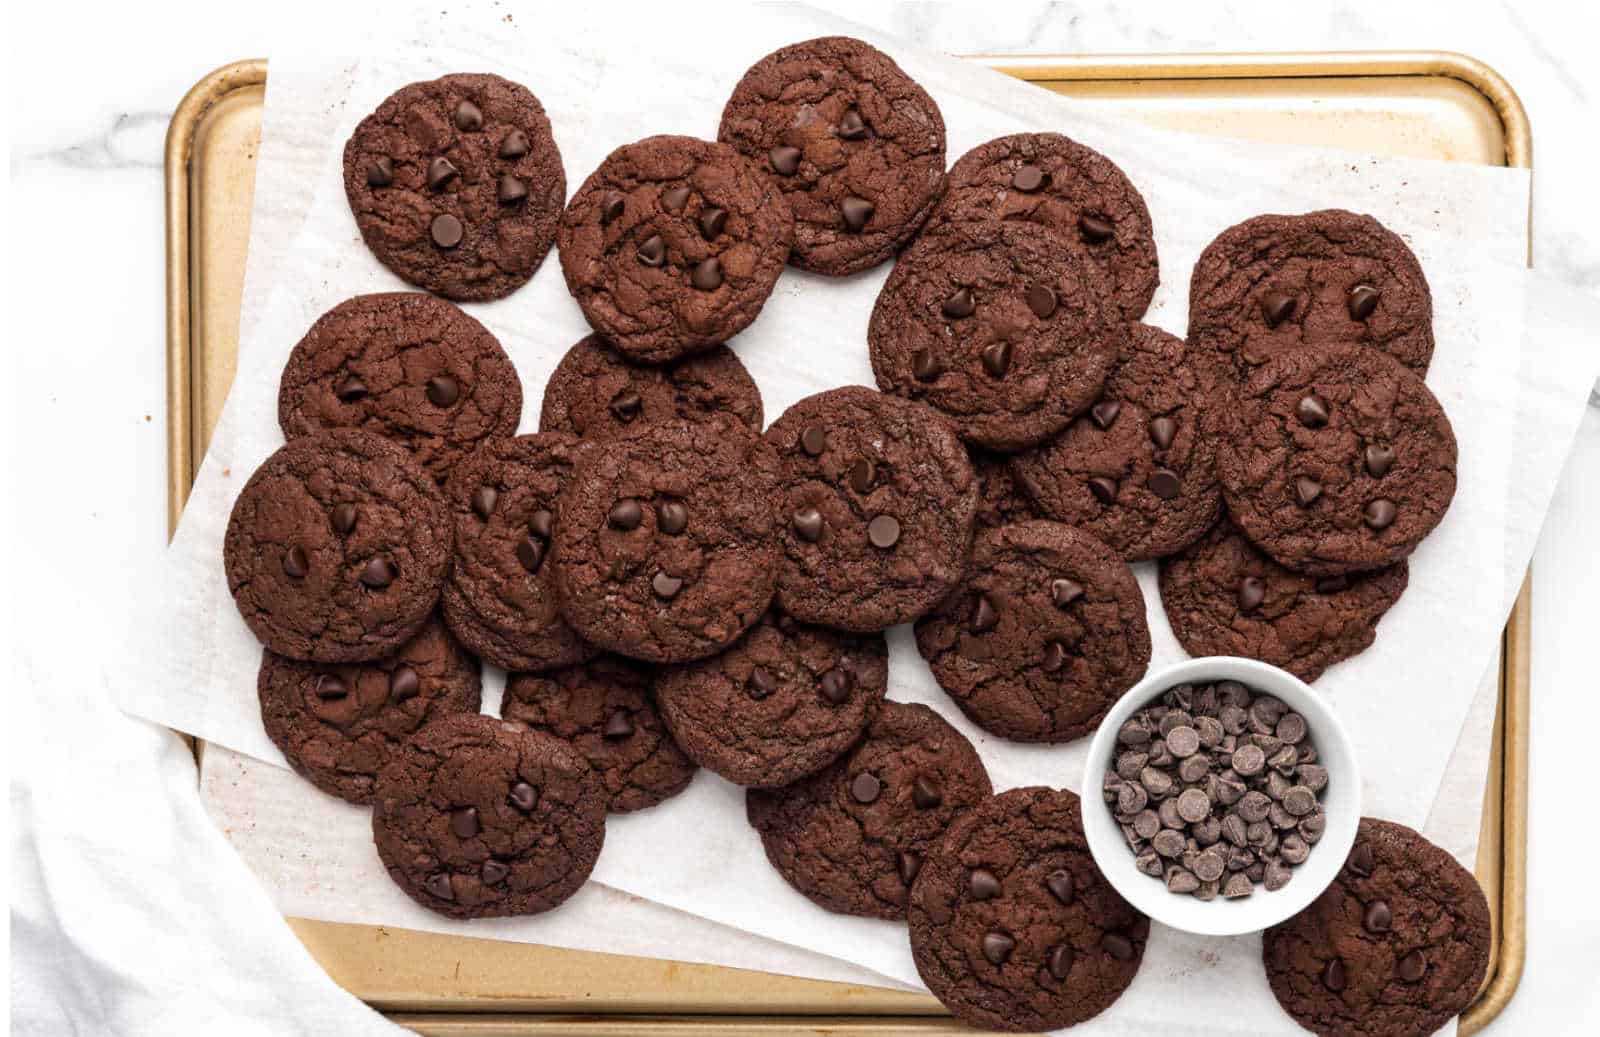 Chocolate chocolate cookies on parchment paper on a cookie sheet.